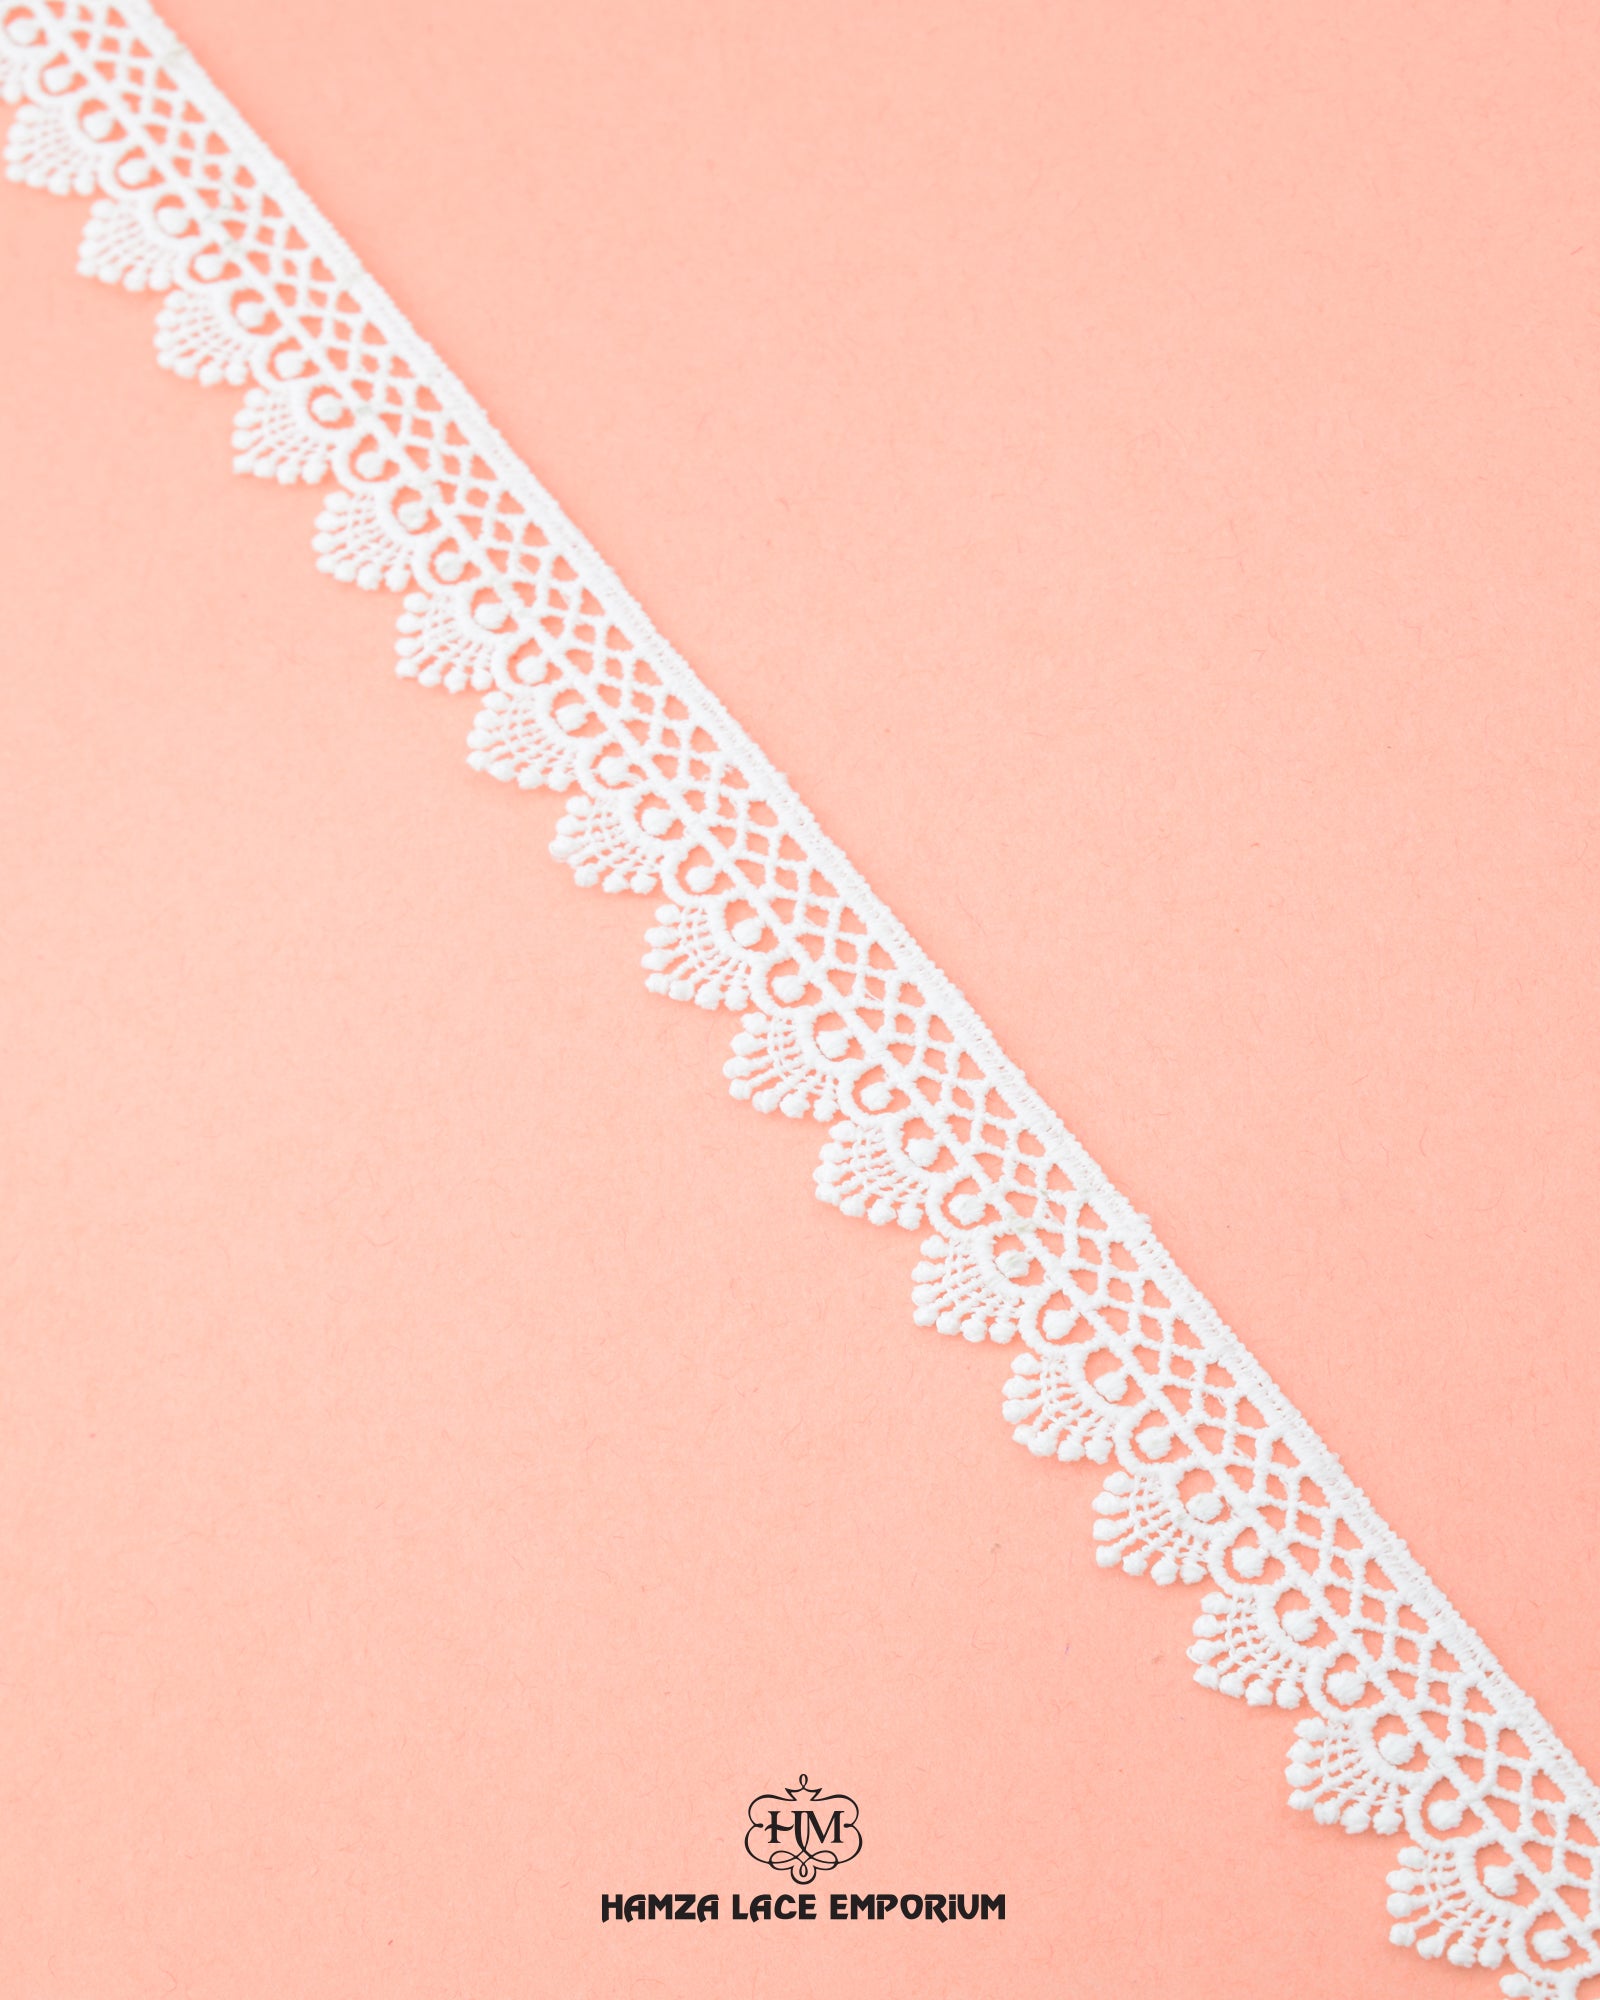 'Edging Scallop Lace 6171' with the 'Hamza Lace' sign at the bottom